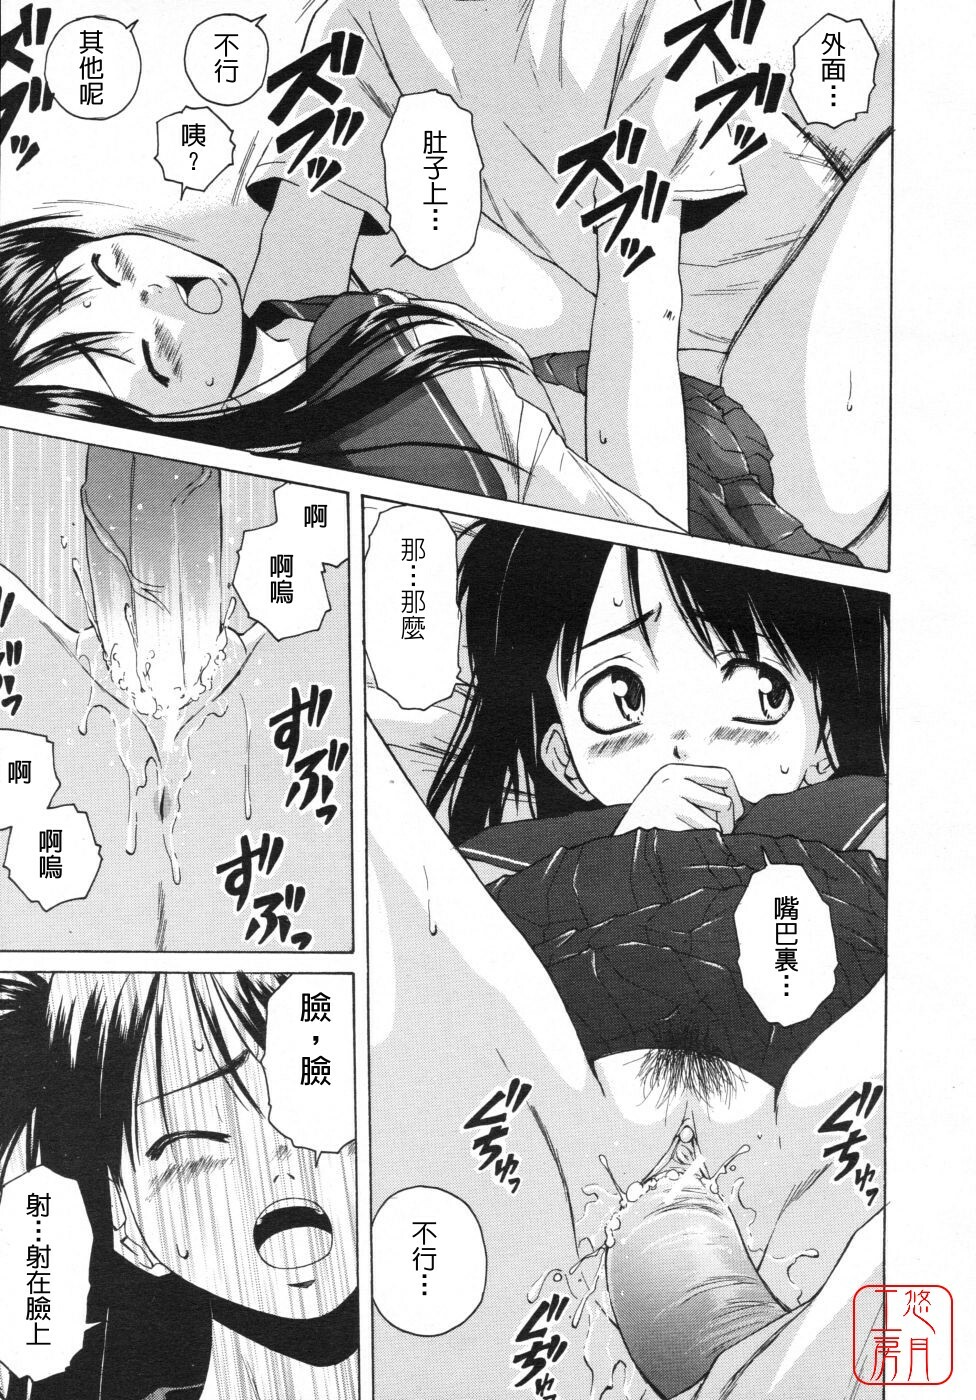 [Fuuga] Girl Friend 2 (Chinese) page 33 full